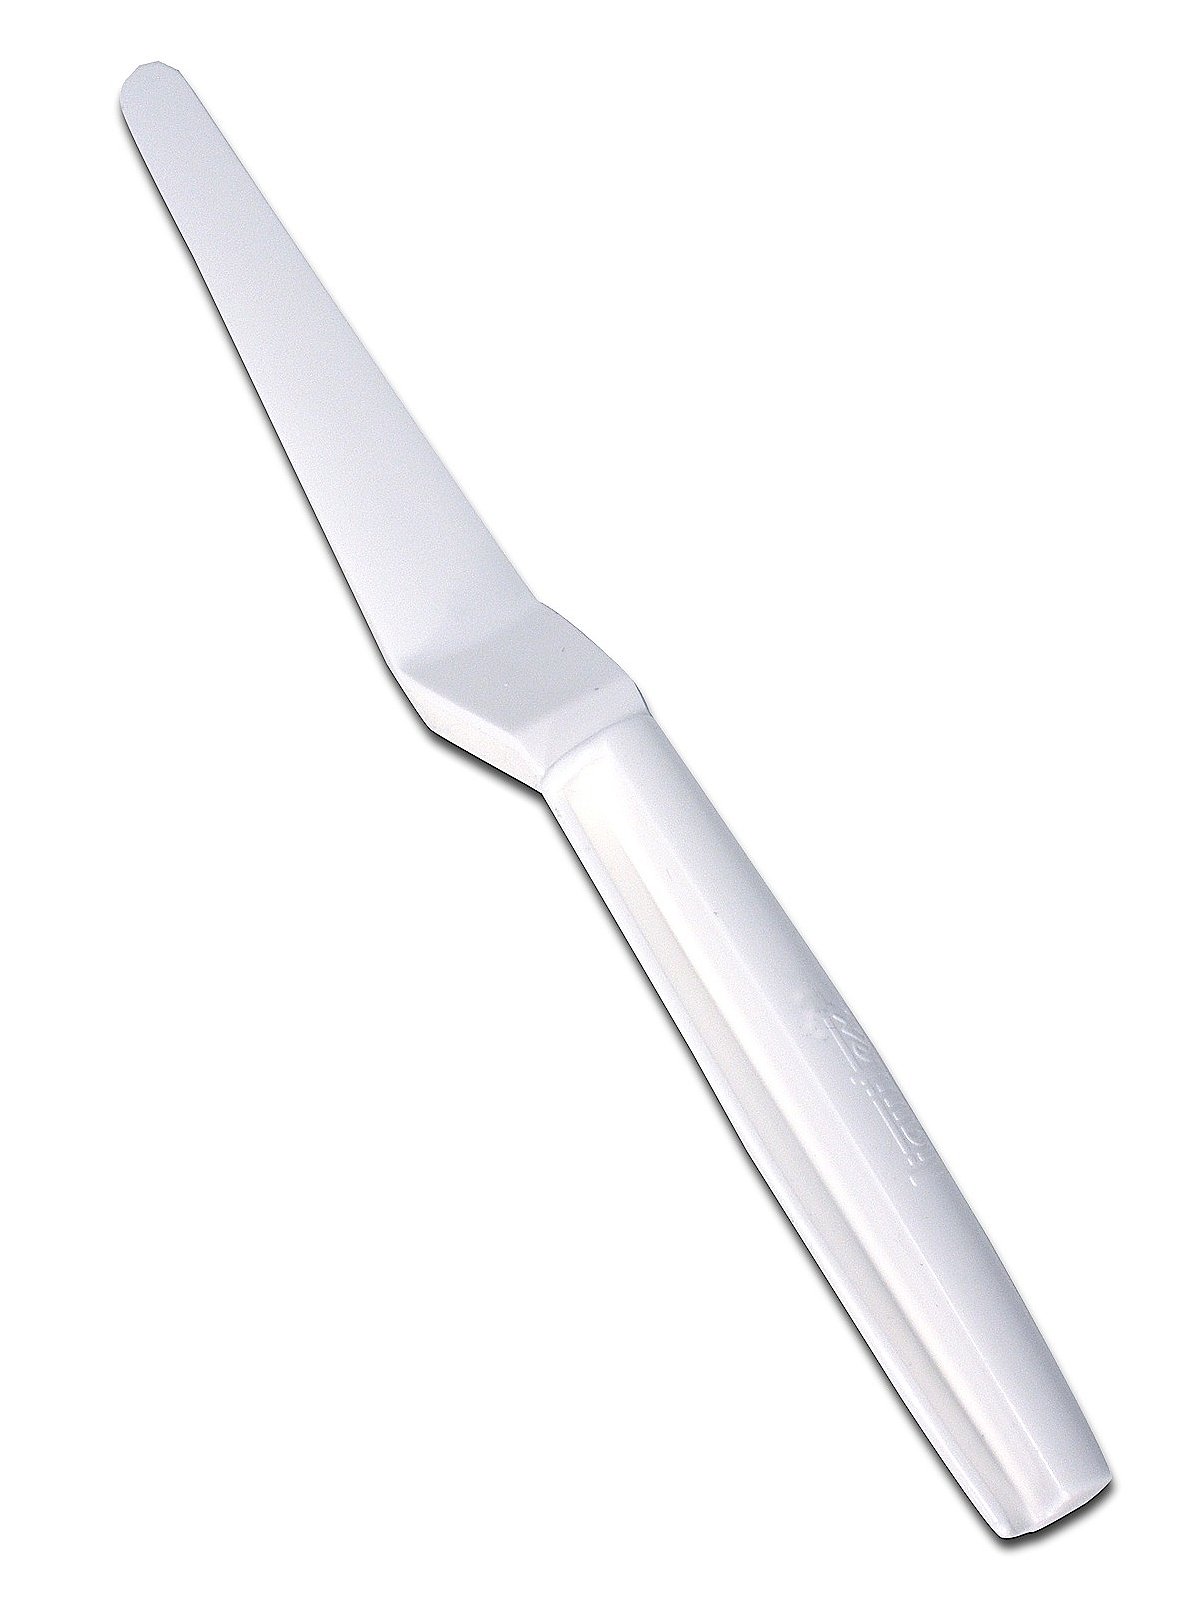  Liquitex Professional Freestyle Plastic Mixing Knives